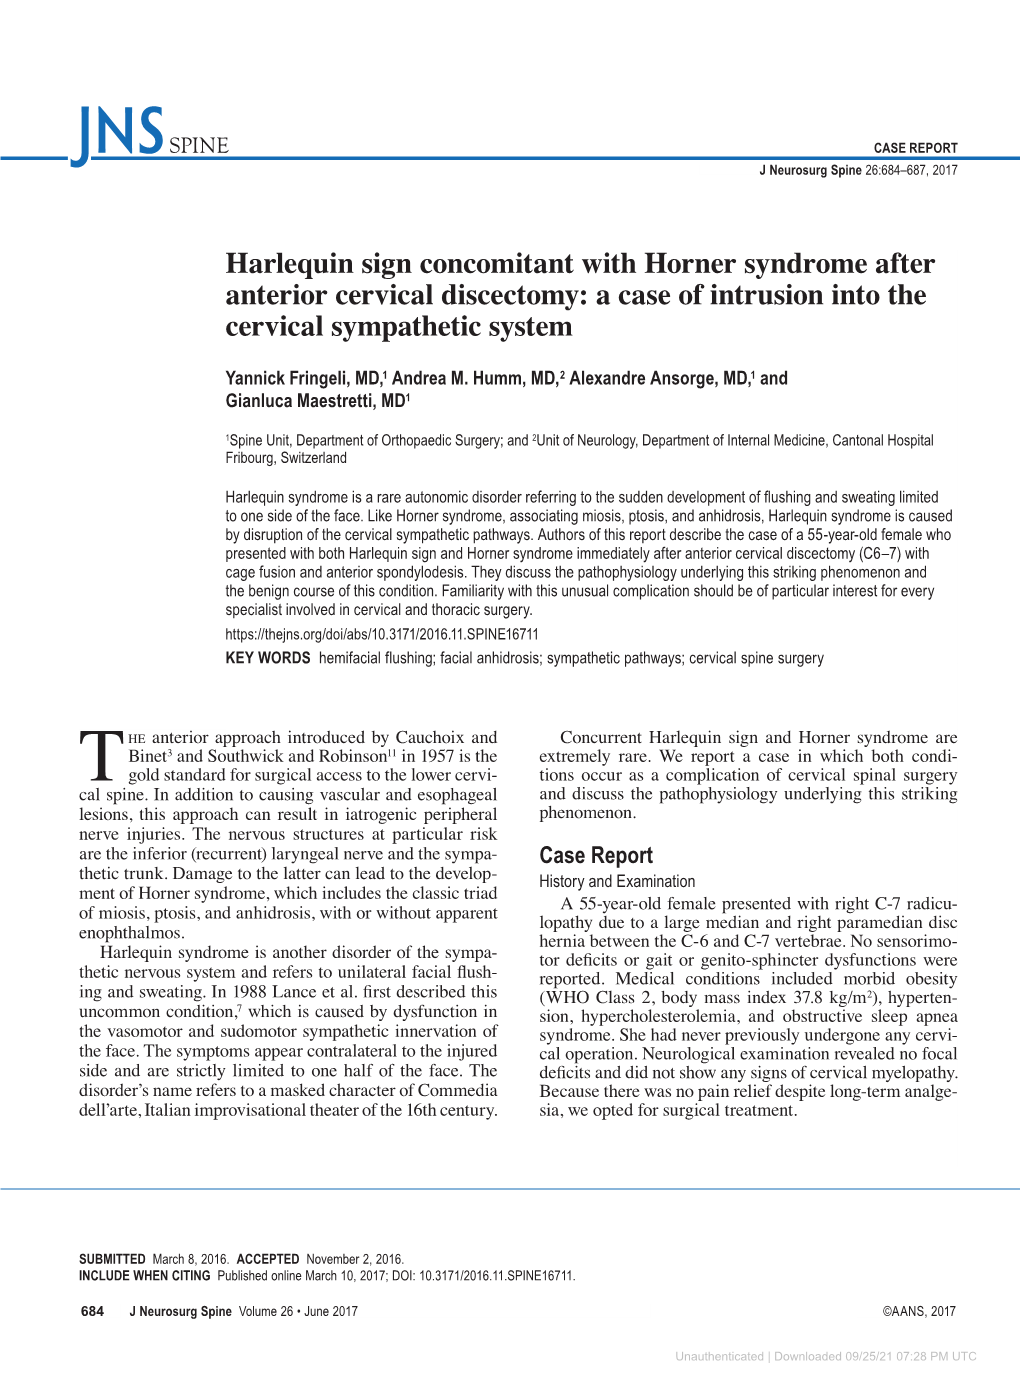 Harlequin Sign Concomitant with Horner Syndrome After Anterior Cervical Discectomy: a Case of Intrusion Into the Cervical Sympathetic System